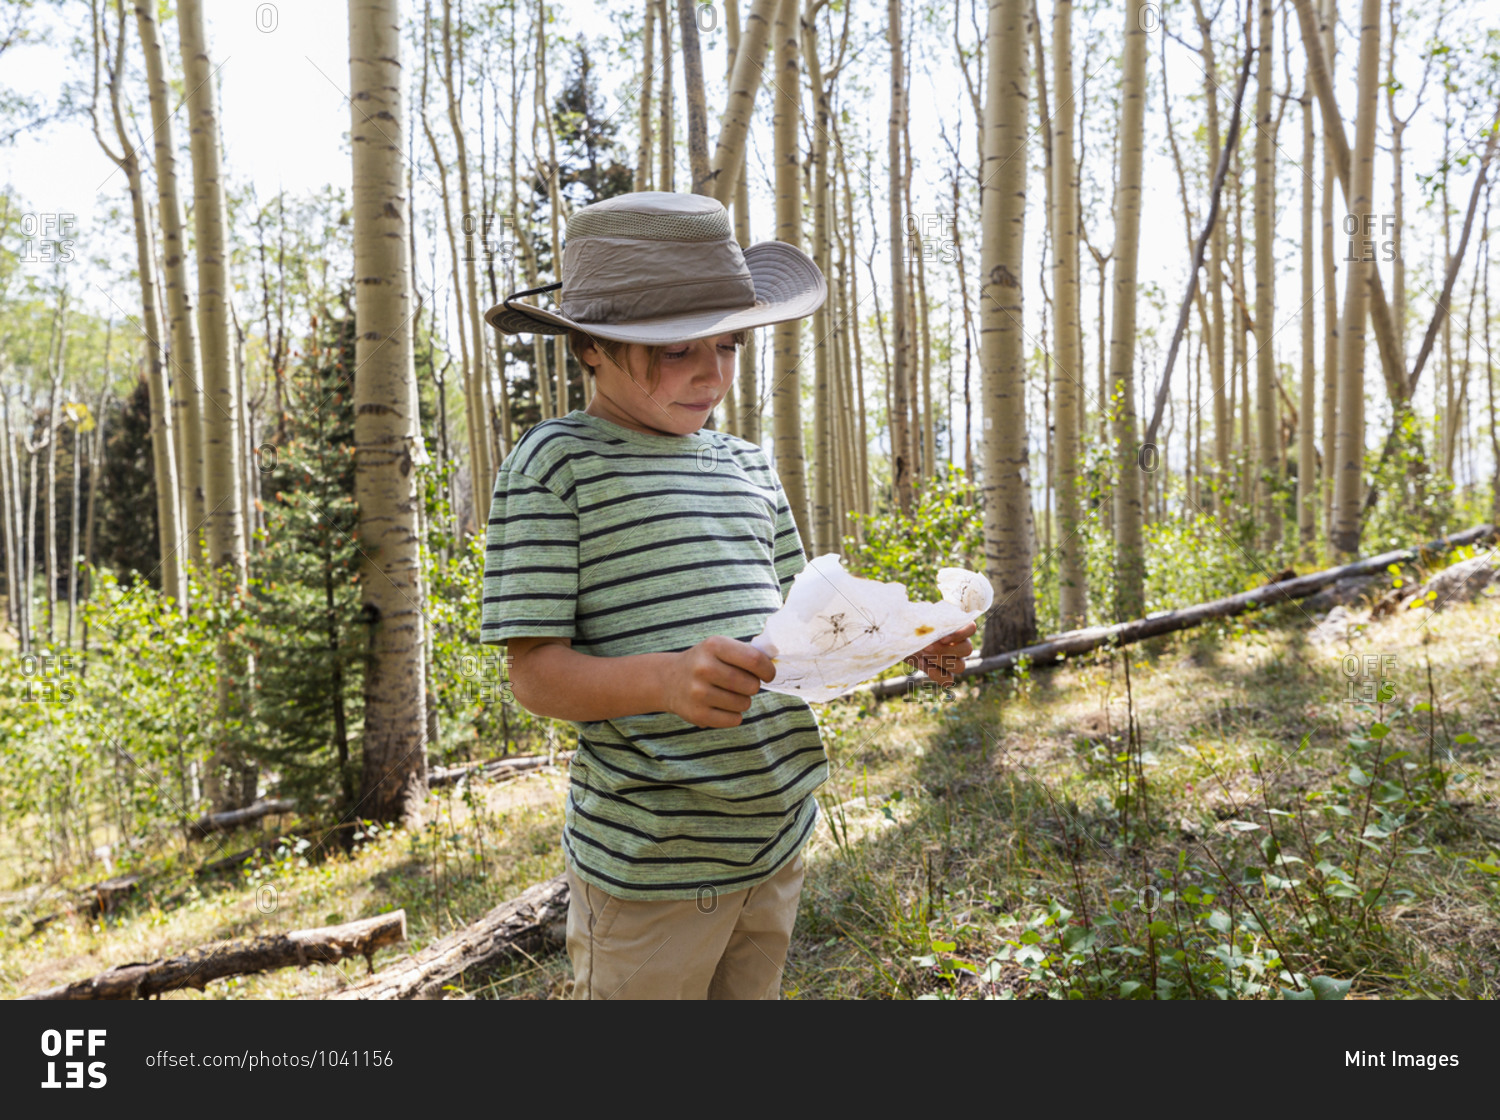 7 year old boy holding treasure map in forest of Aspen trees